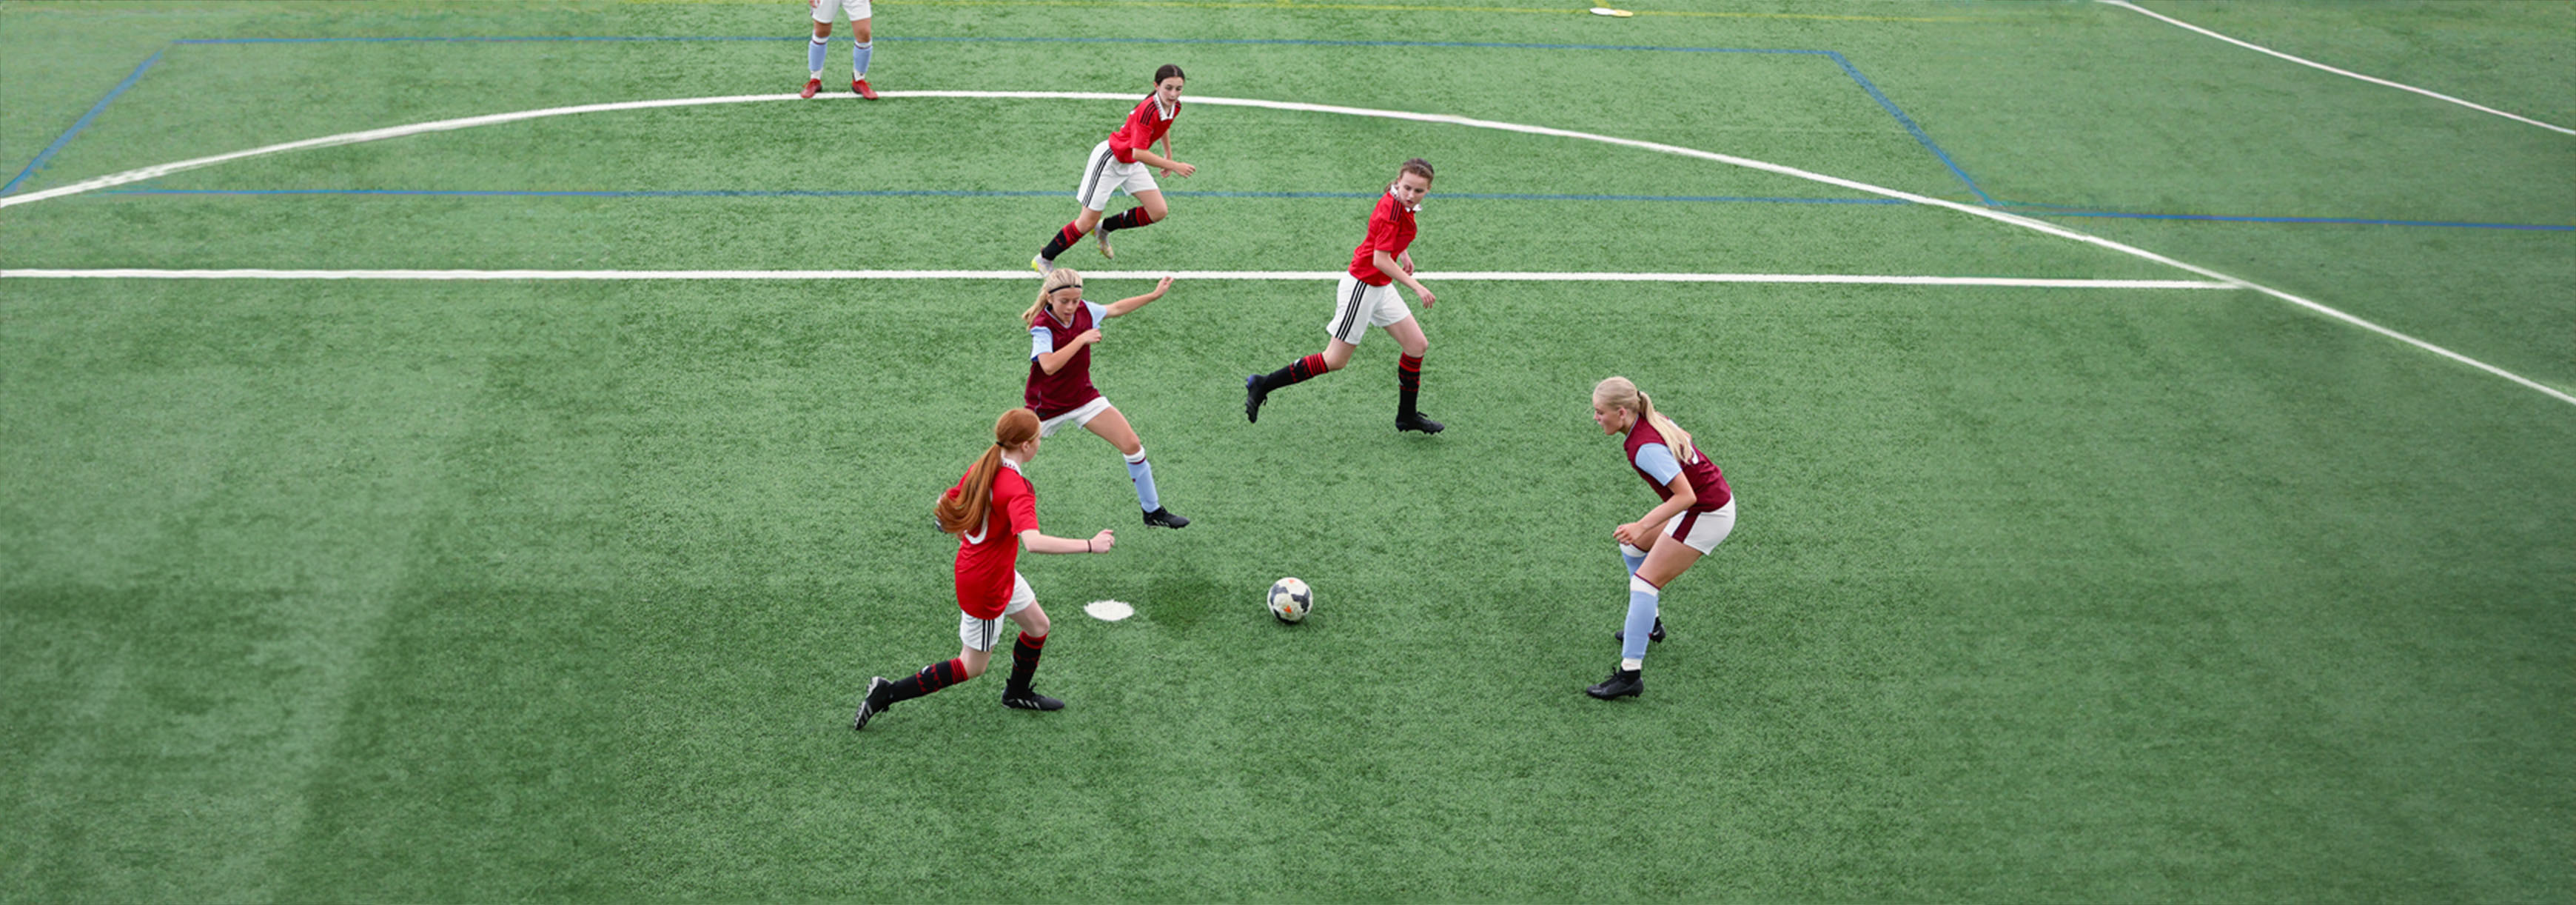 During a tournament on an indoor 3G pitch, a player passes the ball between two defenders to find one of her two teammates who are both running through.